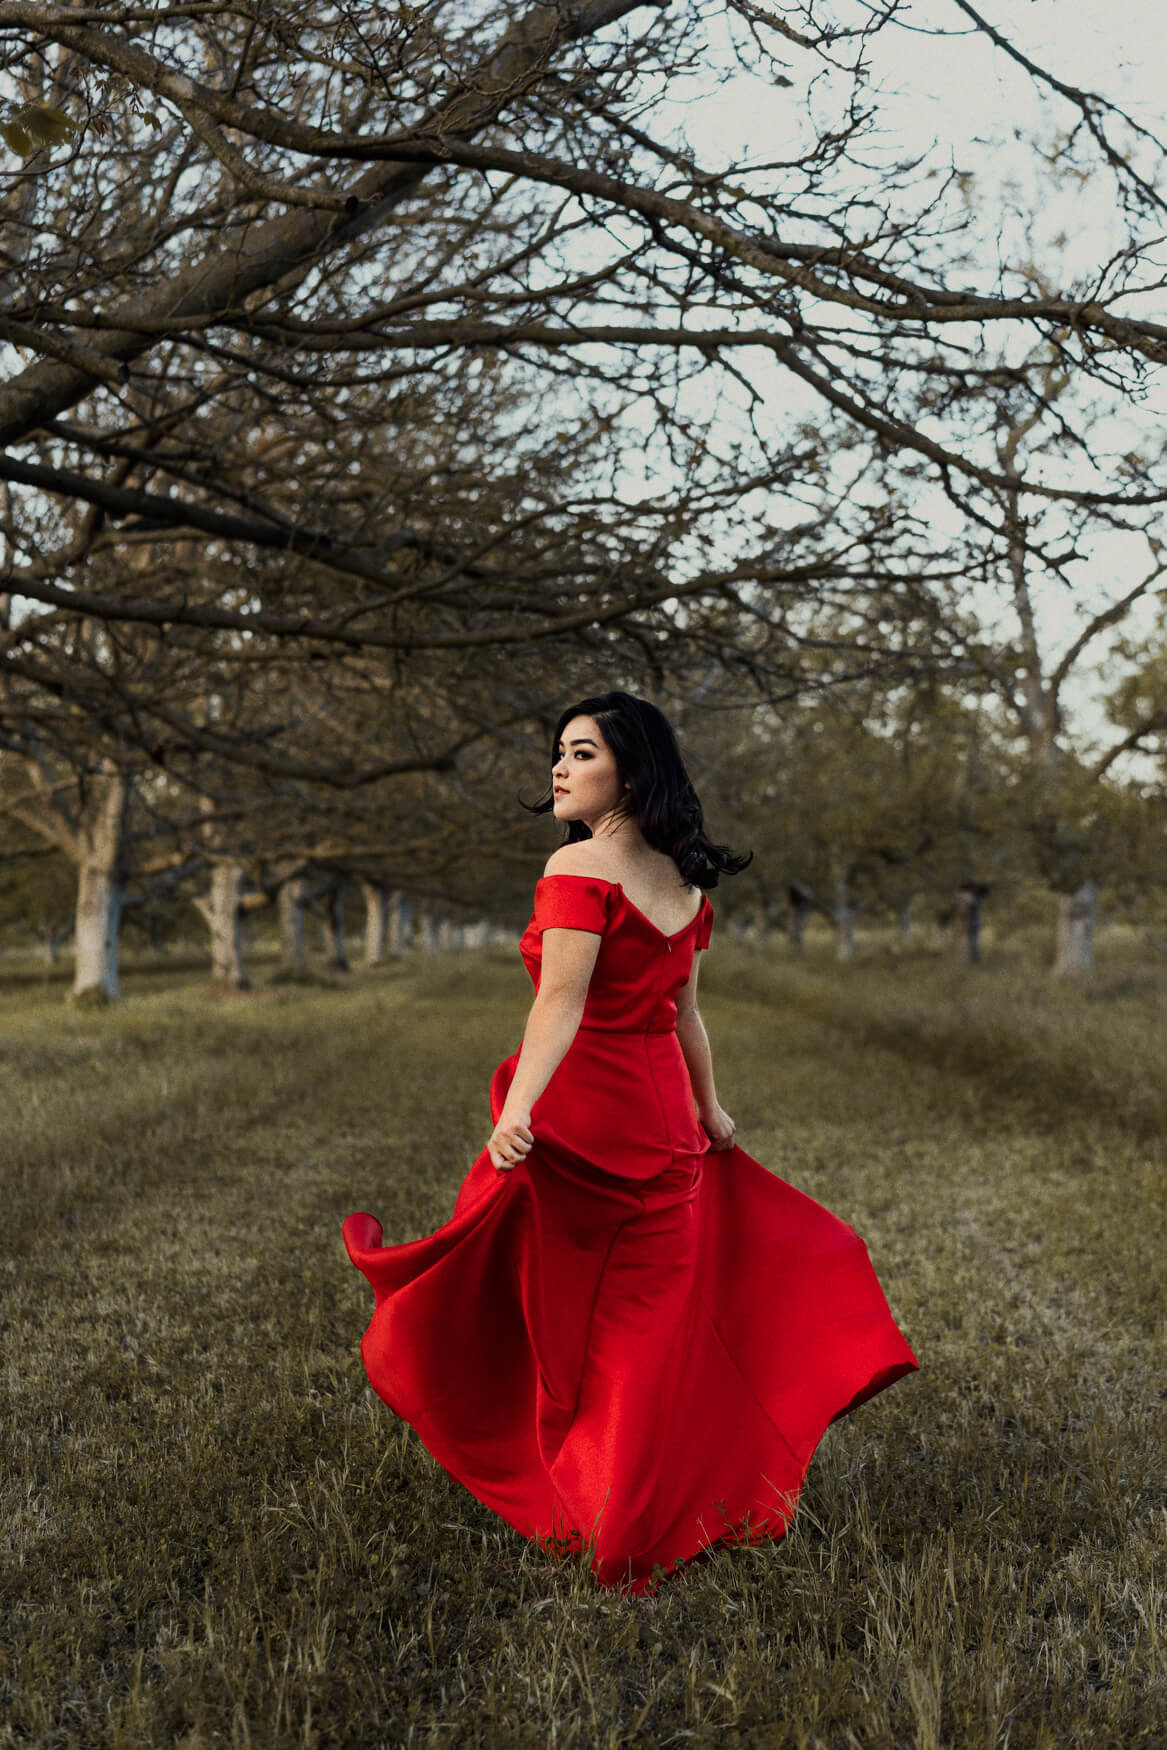 Liz in an epic red dress in the middle of an orchard in Sacramento